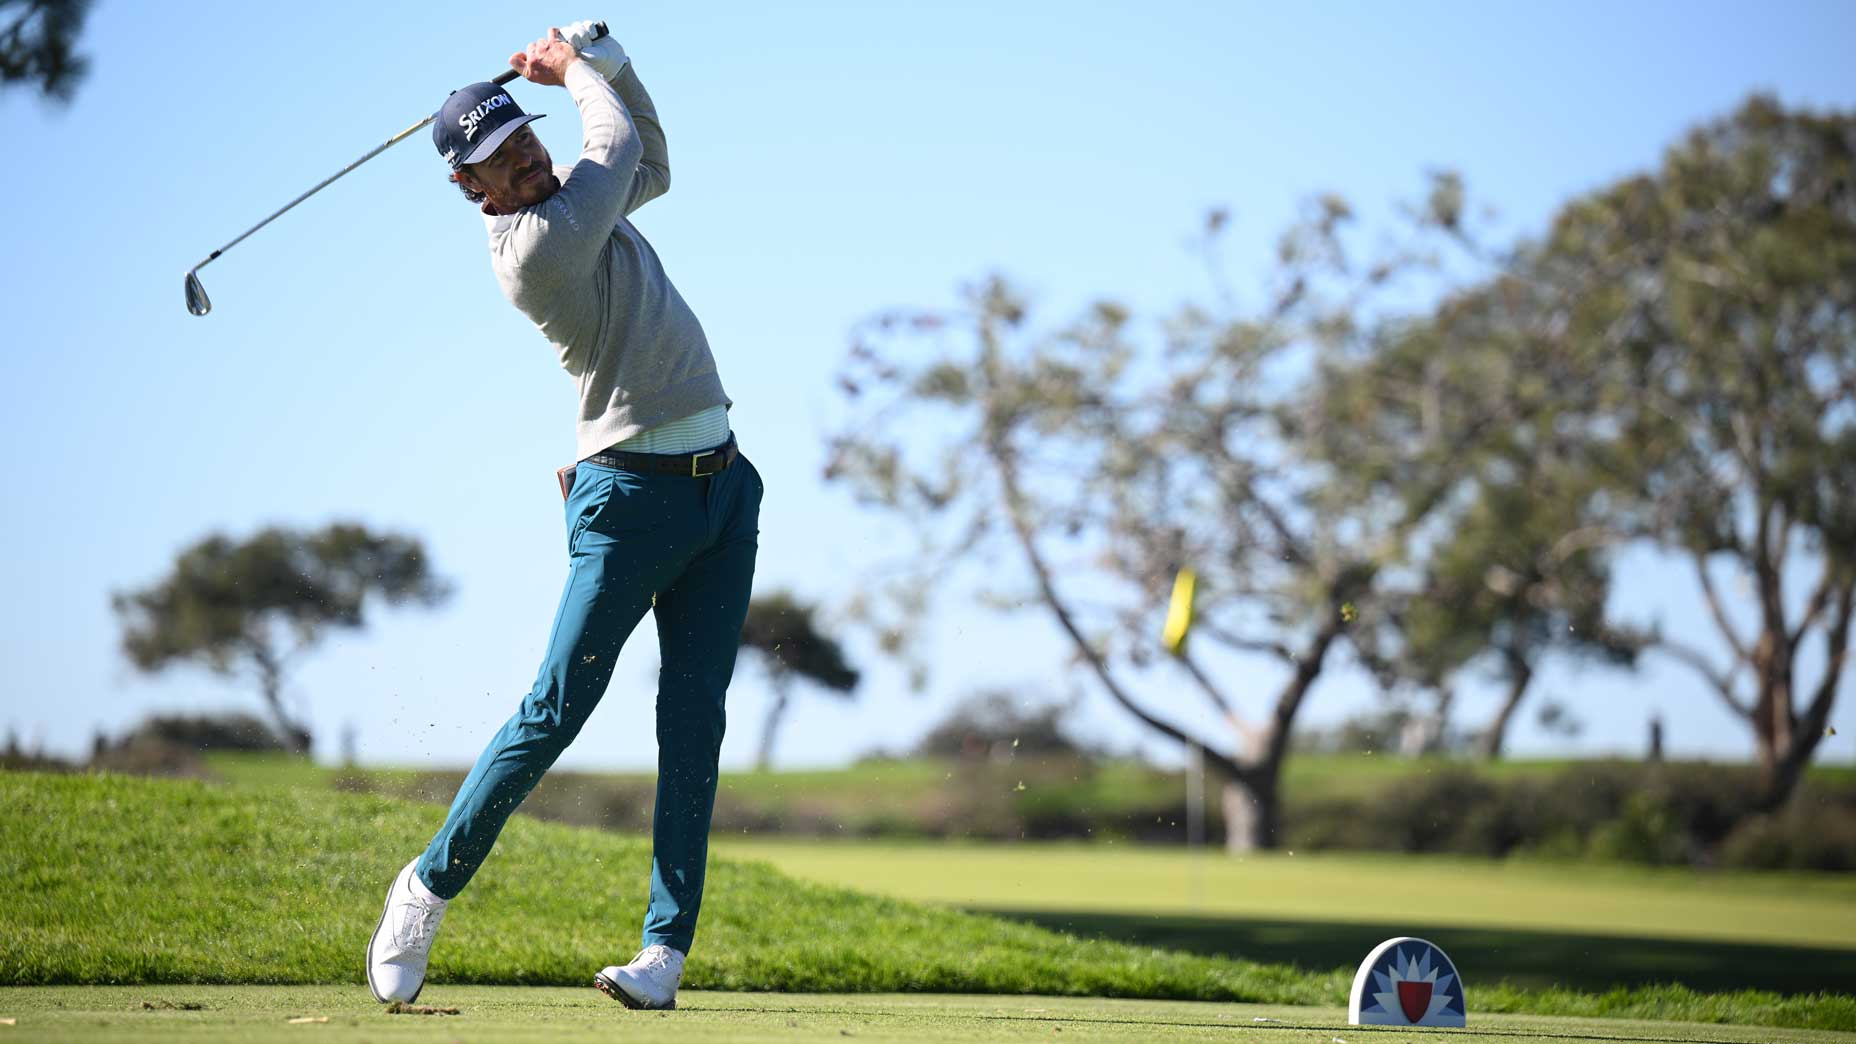 Sam Ryder of the United States plays his shot from the eighth tee of the South Course during the third round of the Farmers Insurance Open at Torrey Pines Golf Course on January 27, 2023 in La Jolla, California.